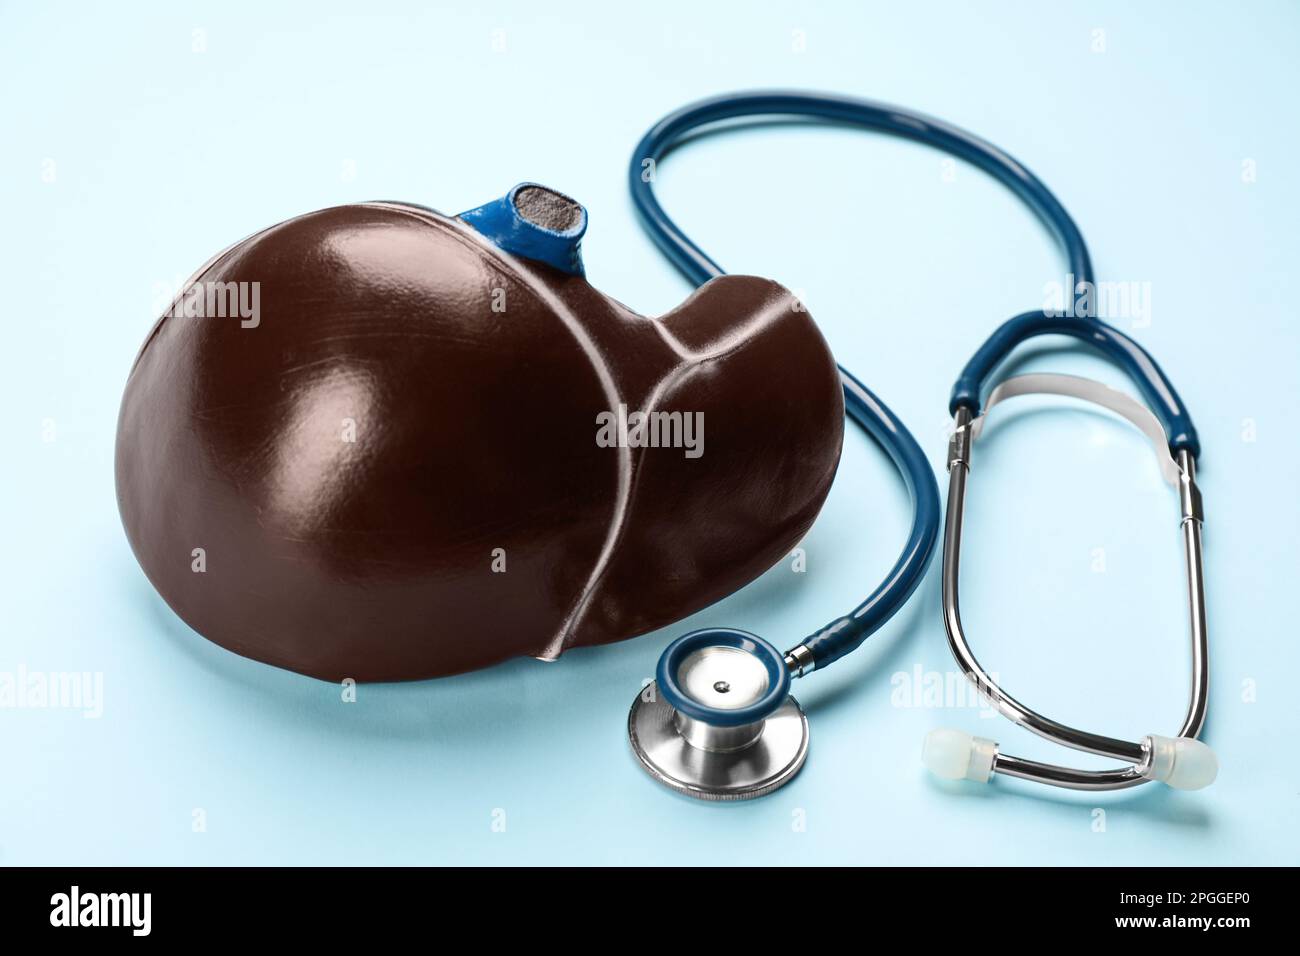 Stethoscope and liver model on light blue background Stock Photo